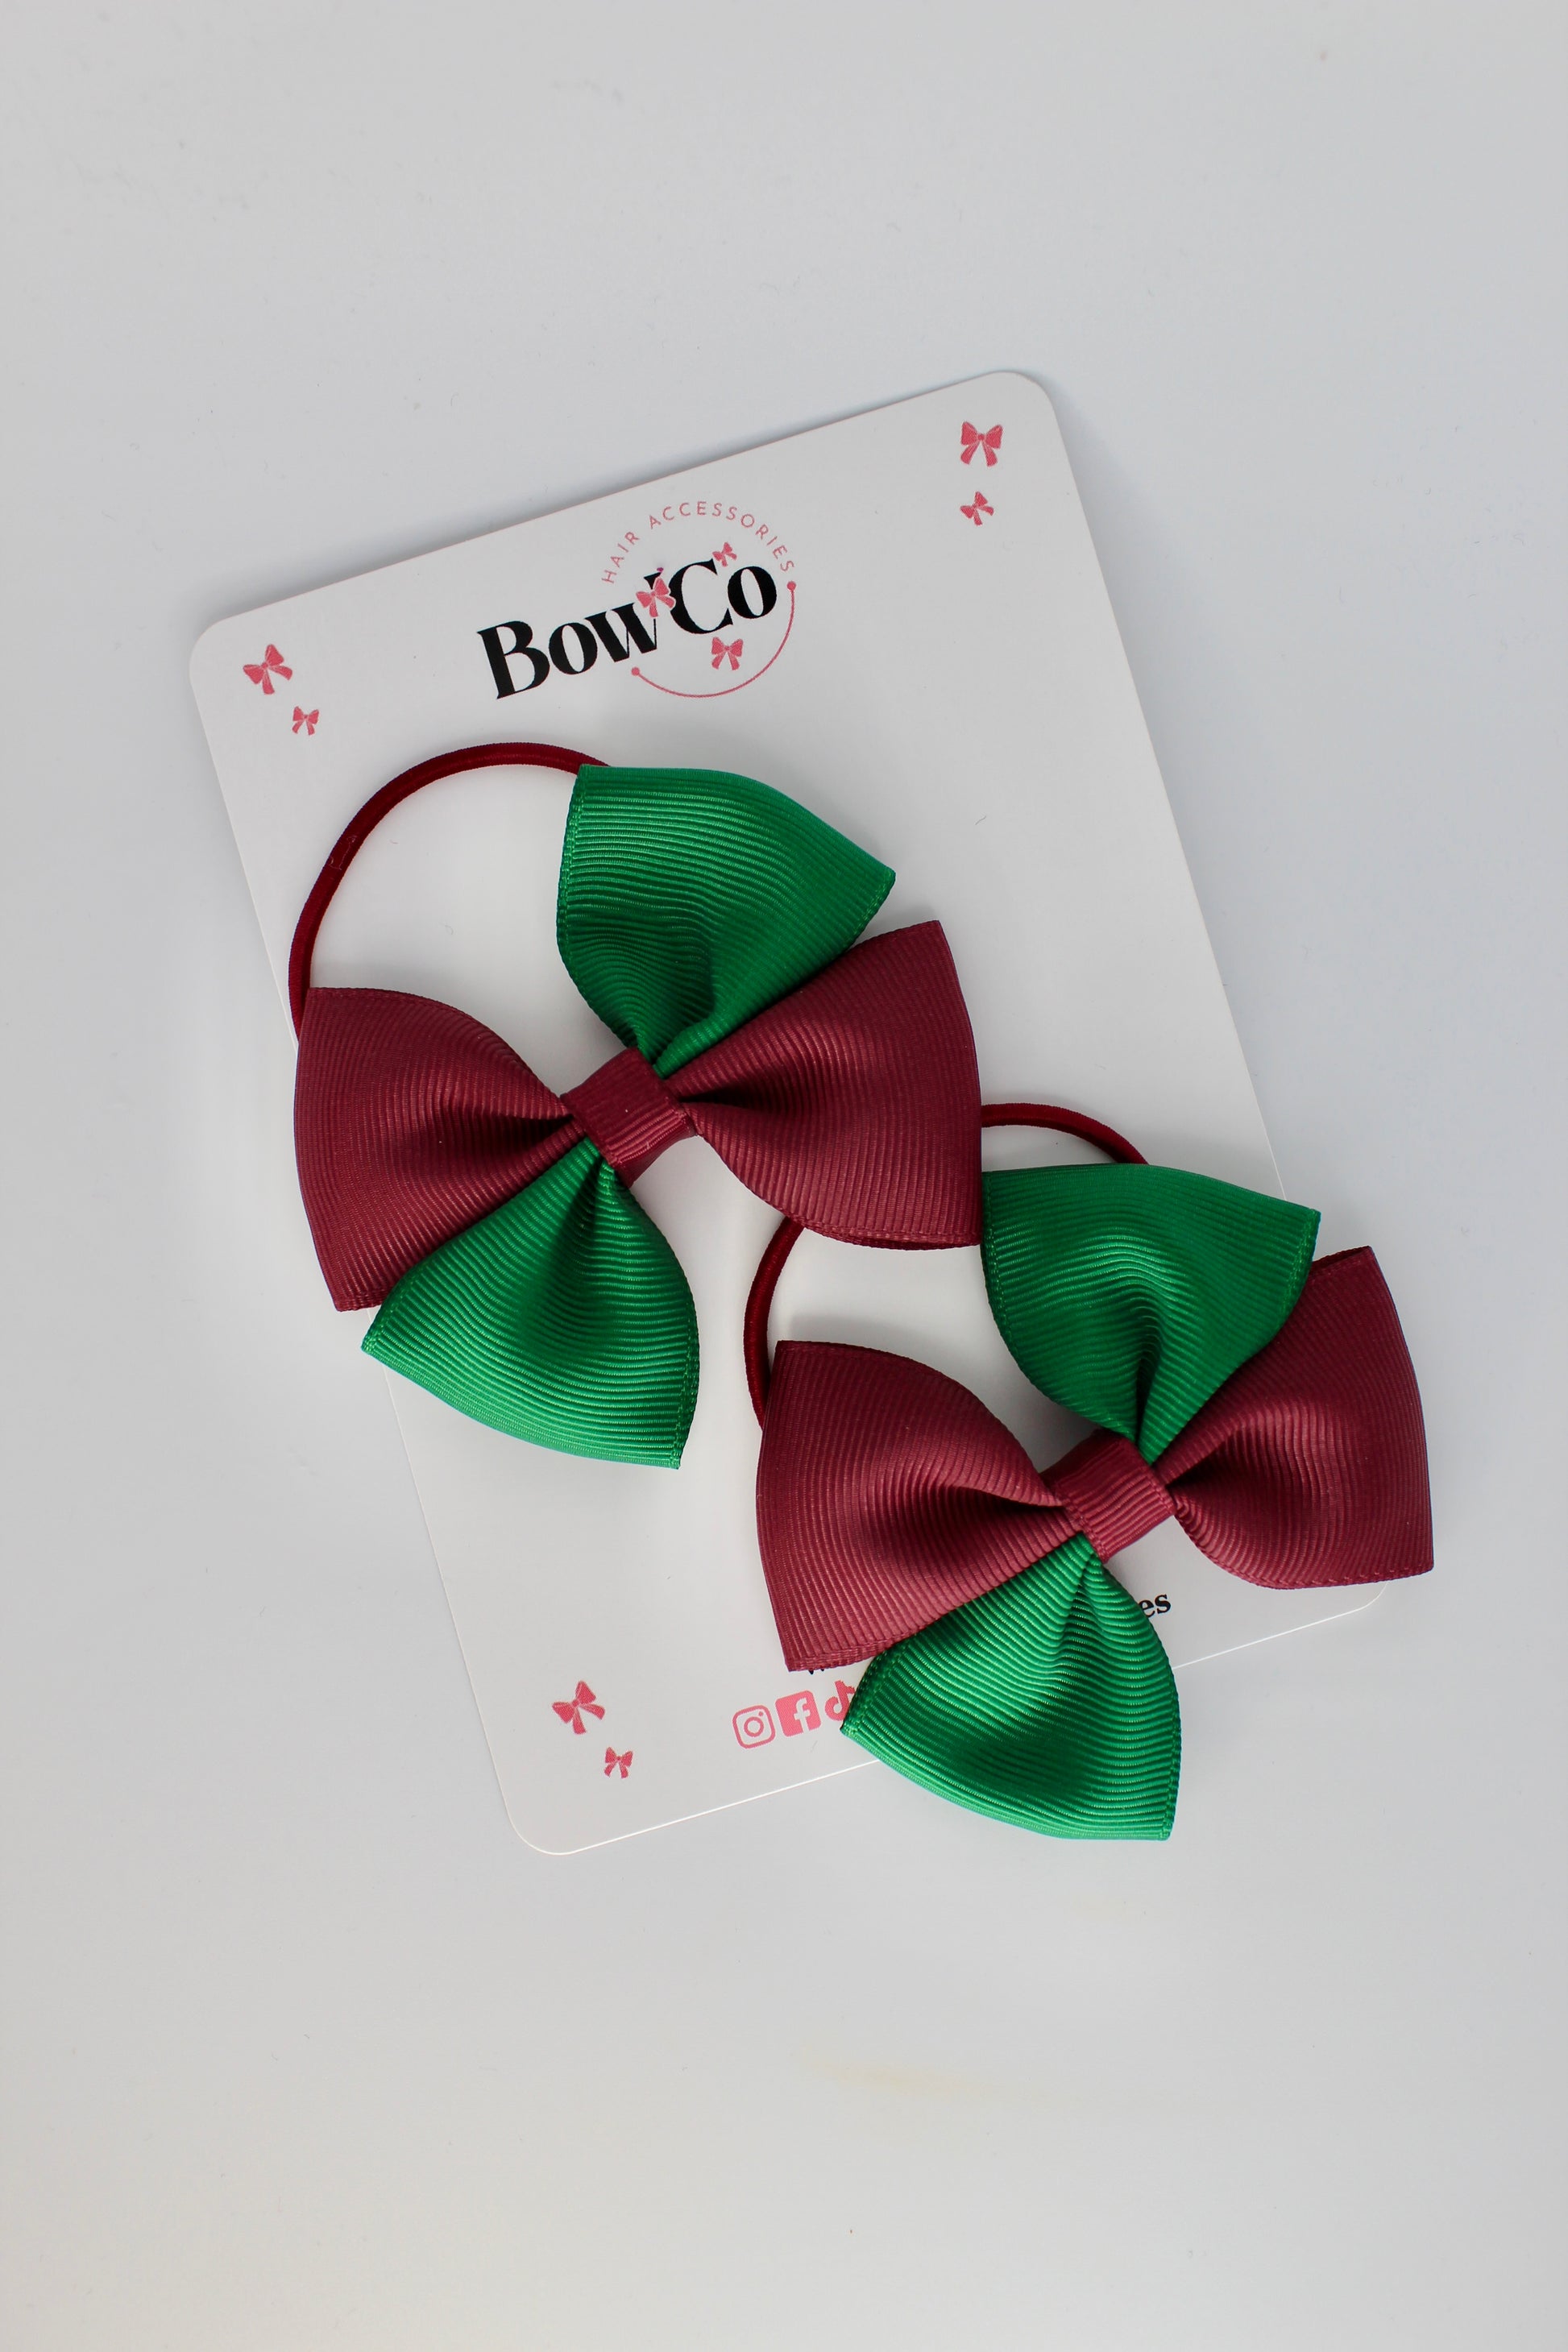 3 Inch Twist Bow - 2 Pack - Elastic Band - Forest Green and Burgundy